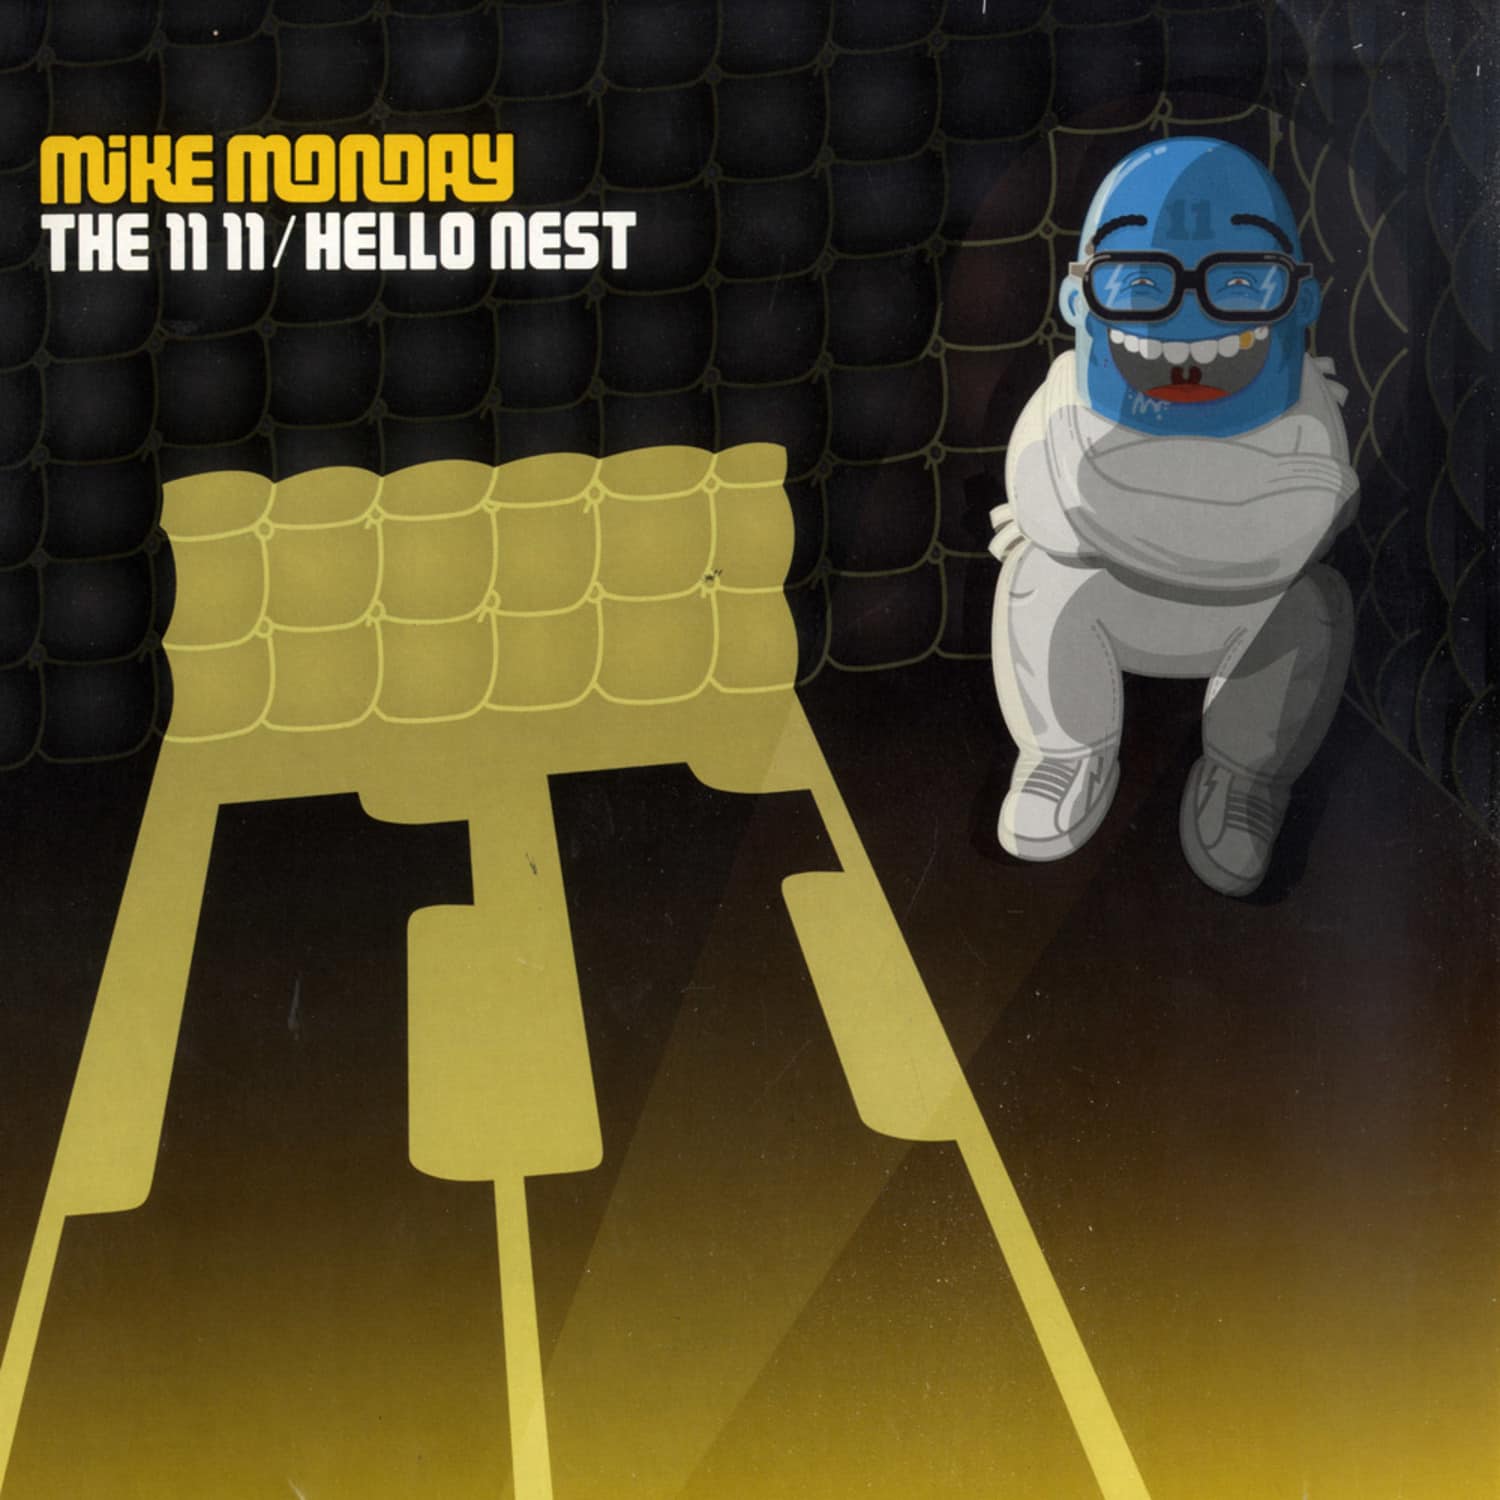 Mike Monday - THE 11 11 / HELLO NEST